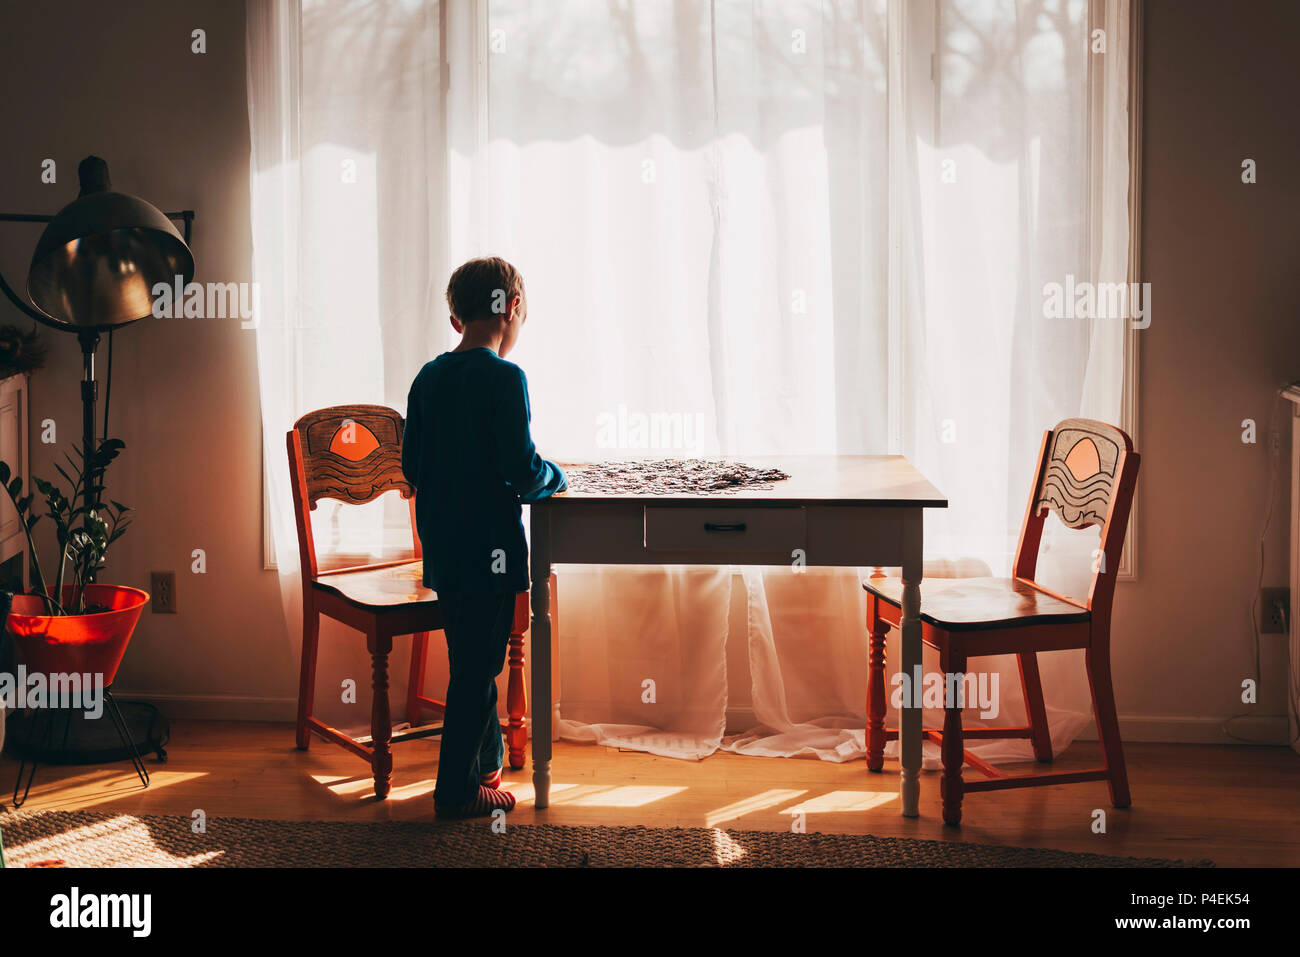 Boy standing by a table doing a jigsaw puzzle Stock Photo